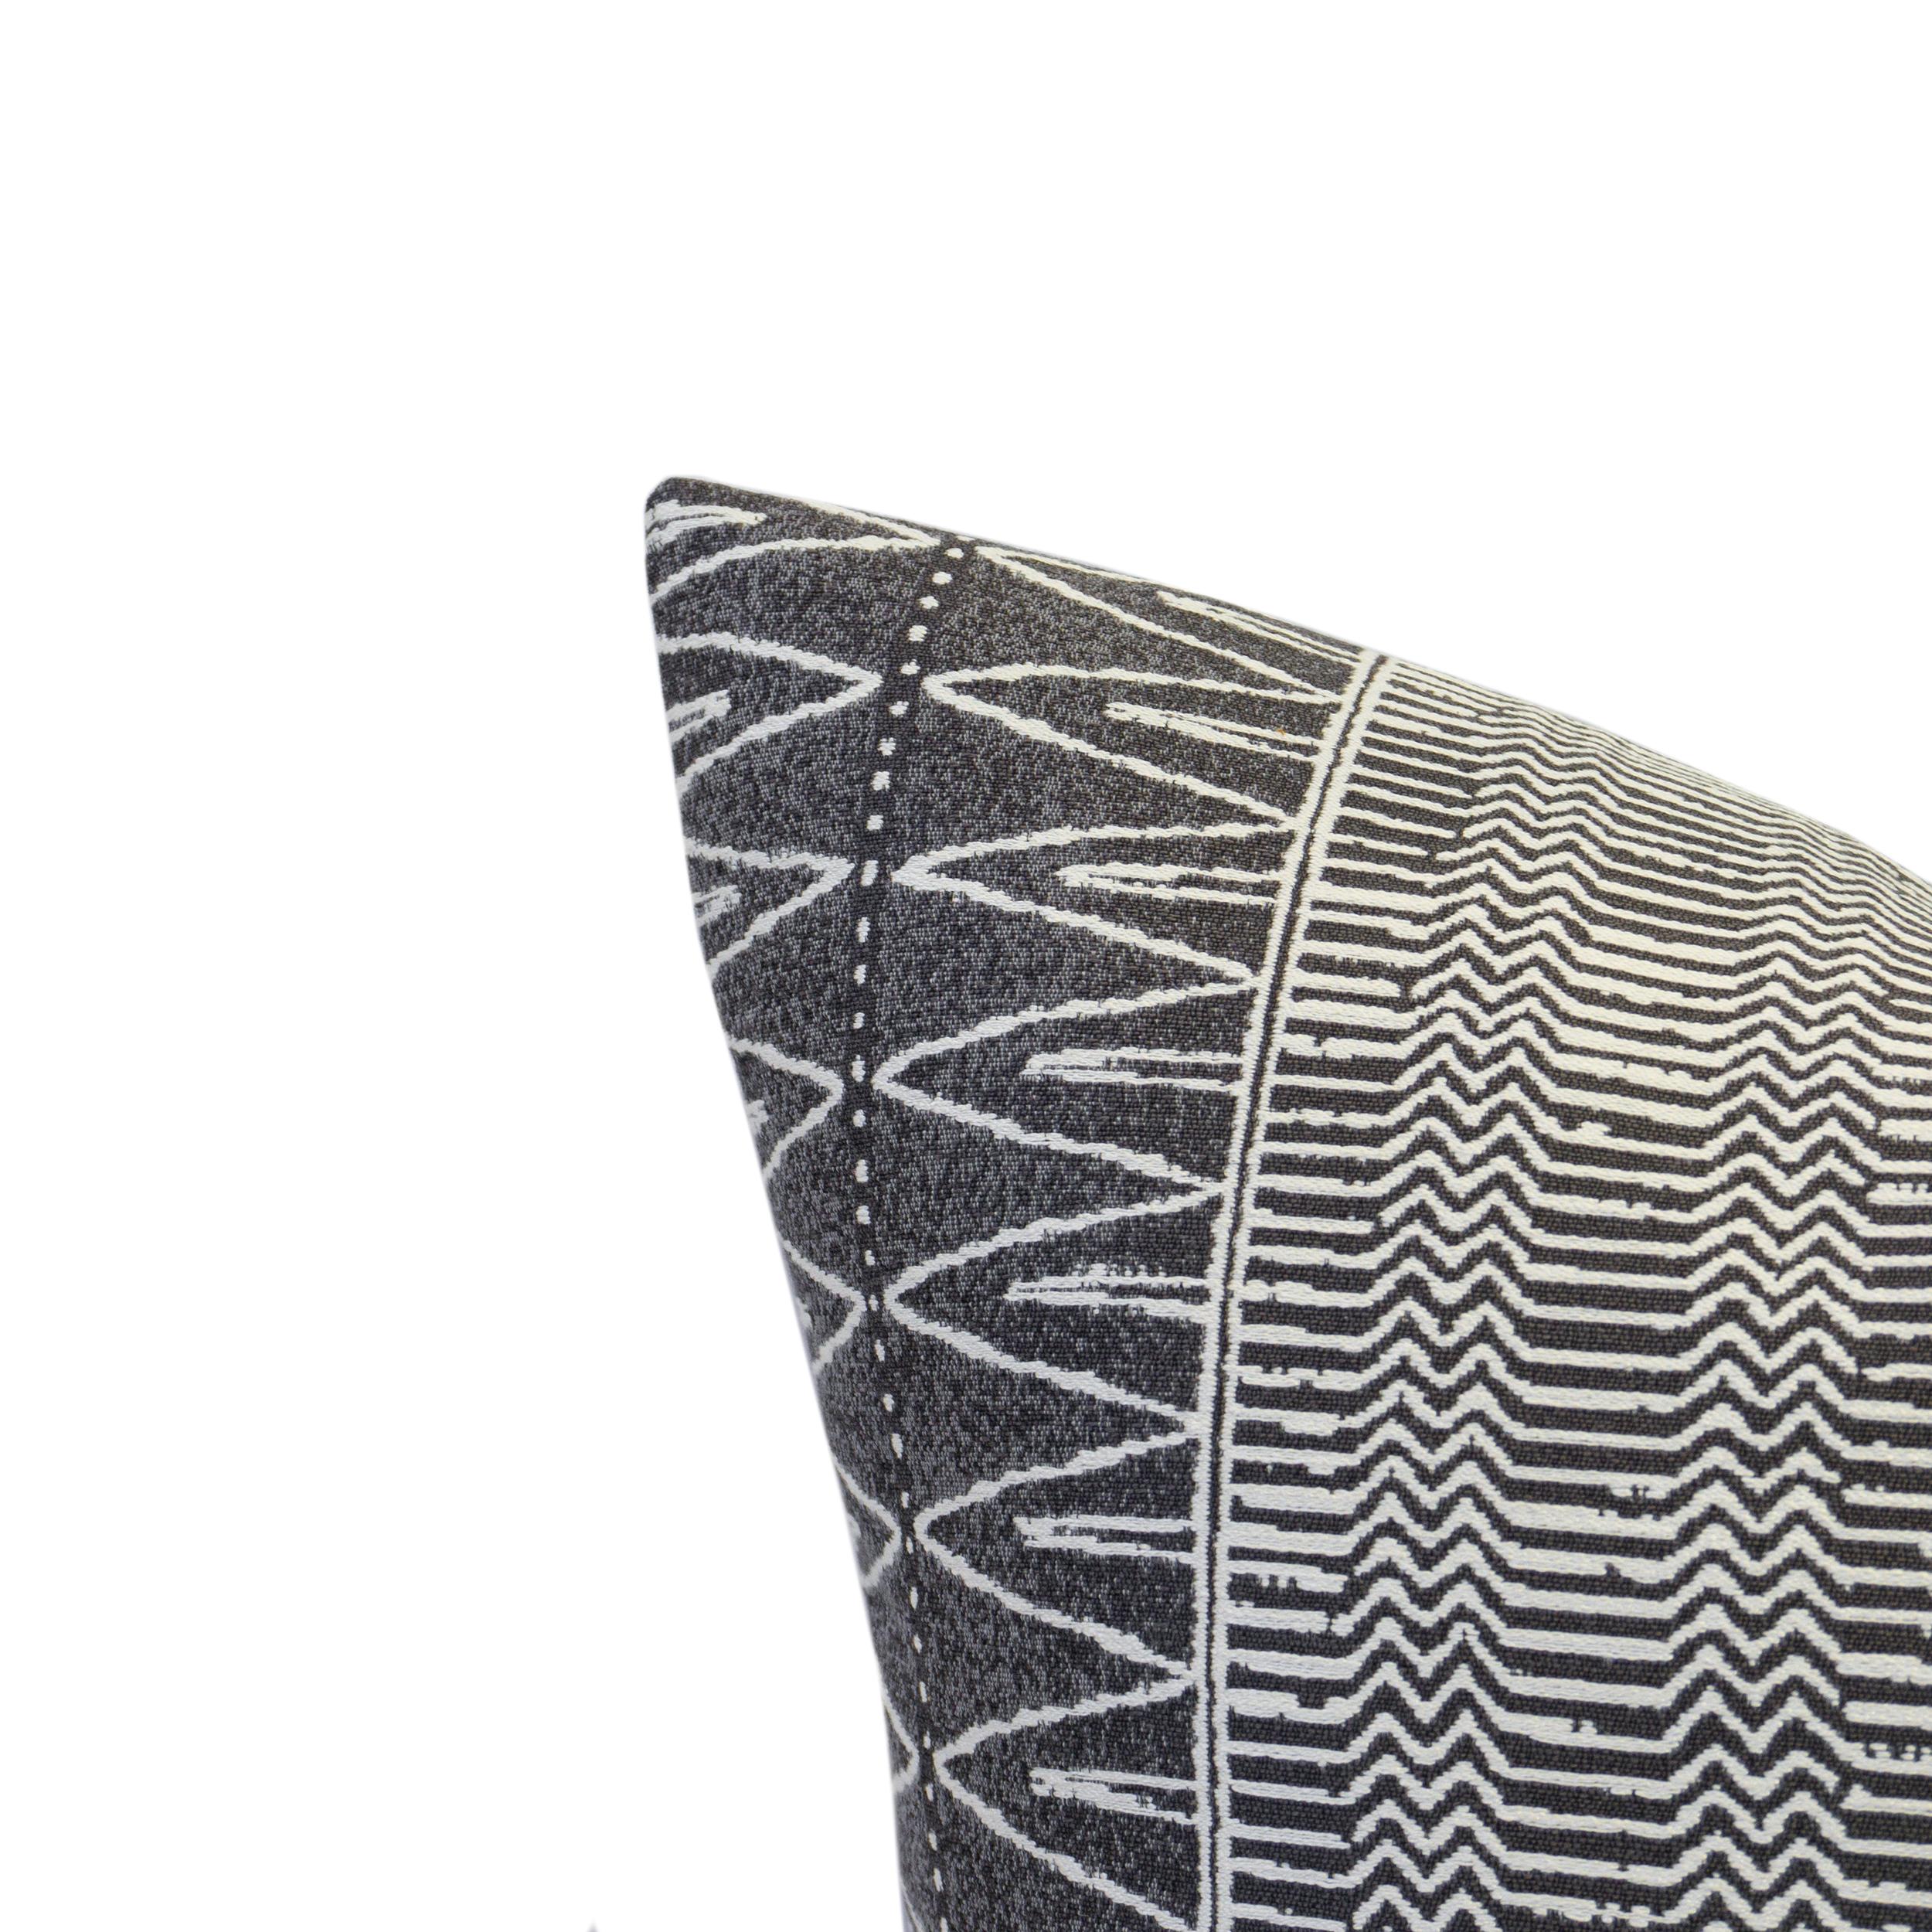 American Zig Zag Patterned Stain Resistant Fabric Gray and White Square Pillows For Sale